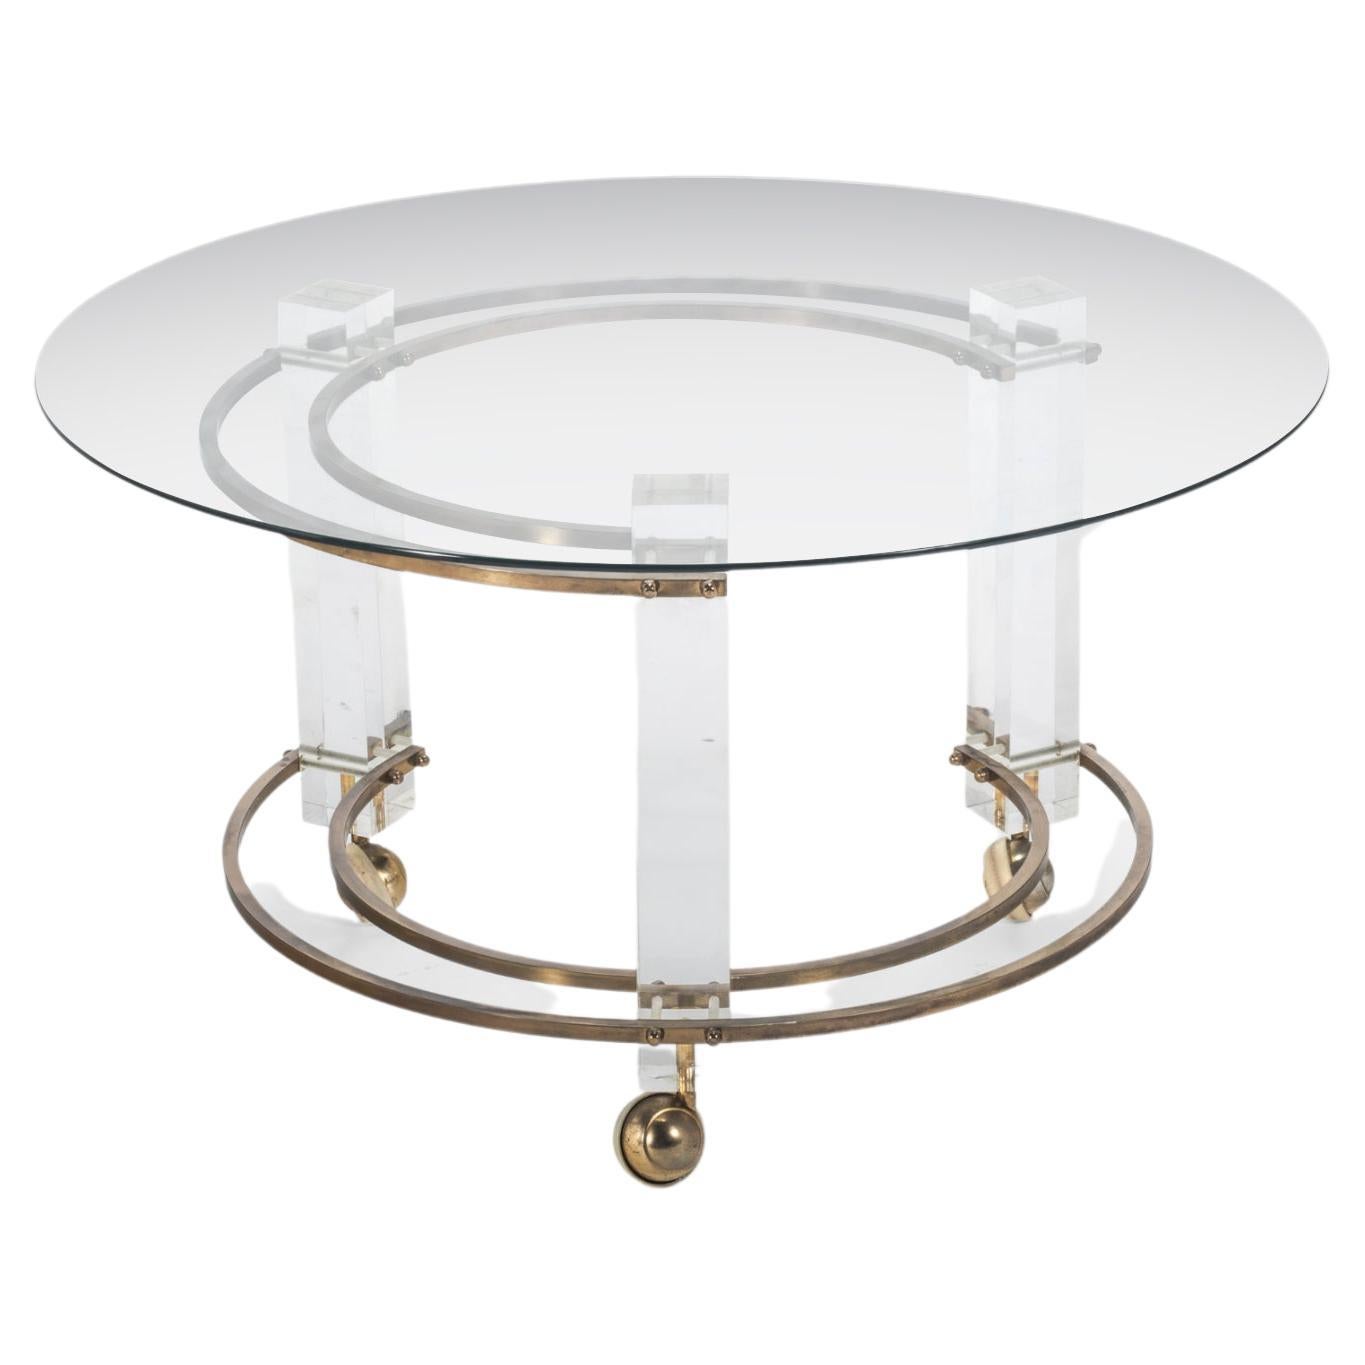 Hollywood Regency Lucite & Brass Coffee Table on Casters by Charles Hollis Jones For Sale